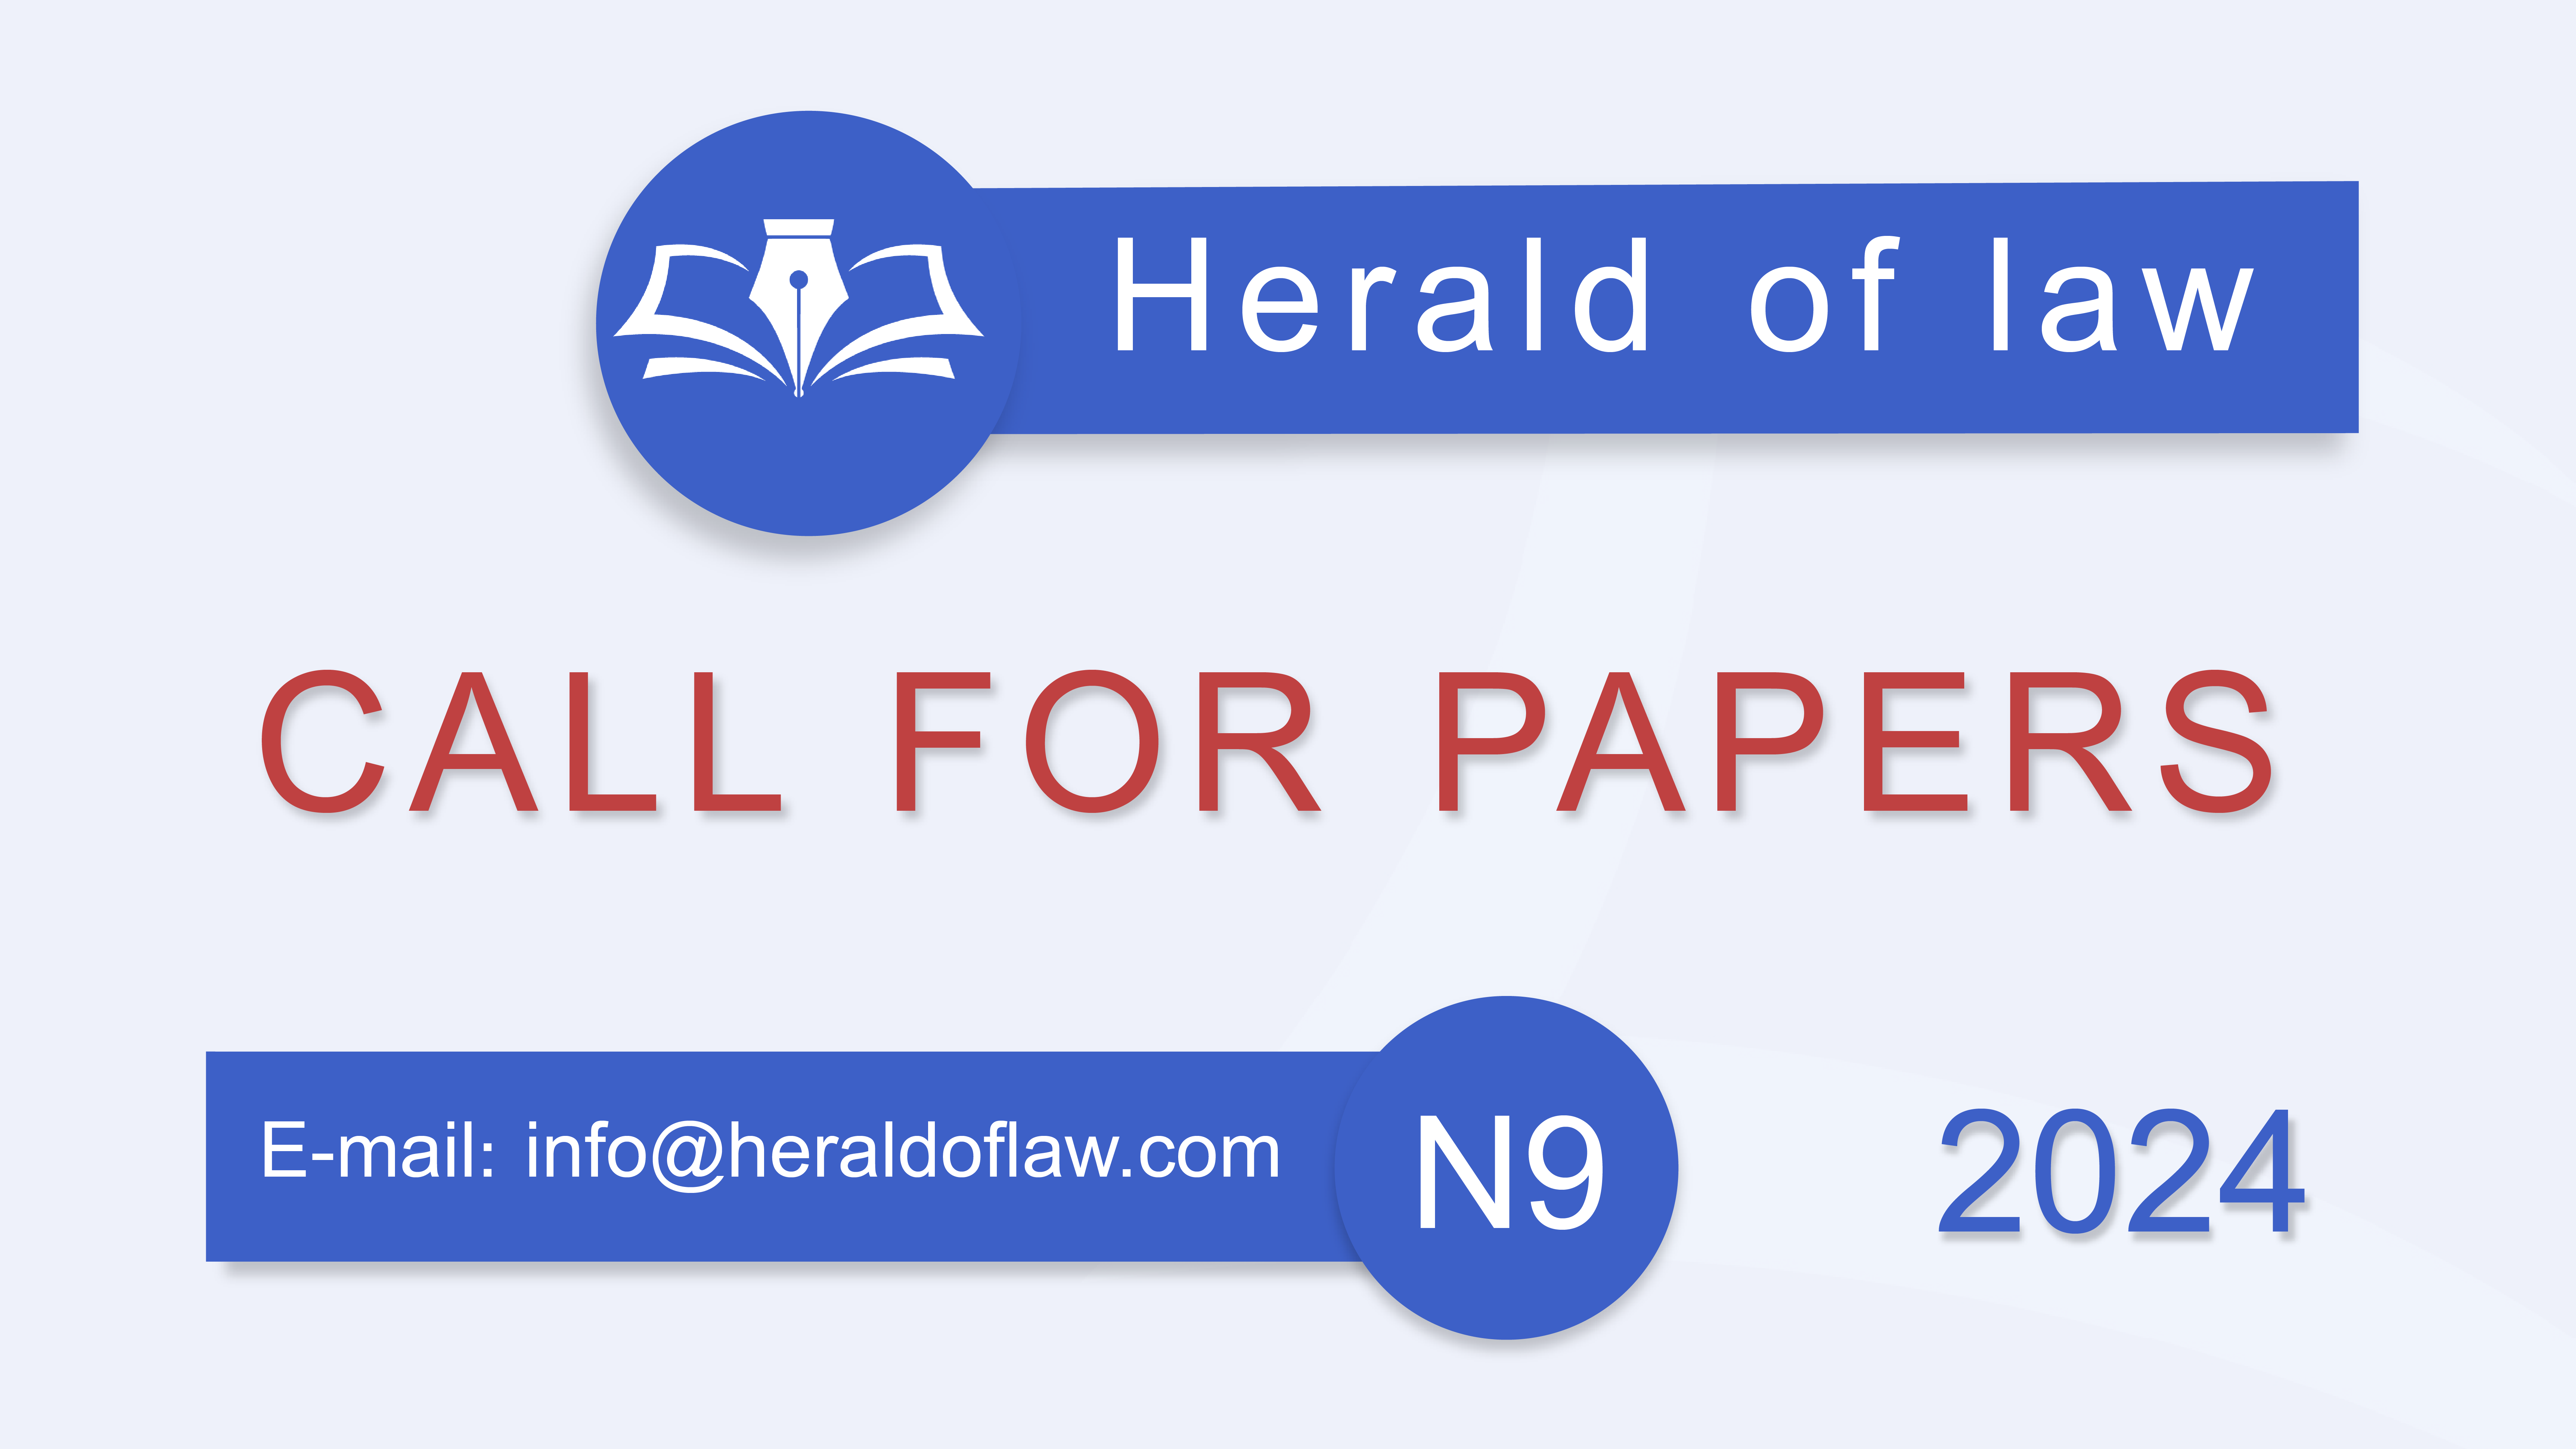 Call for papers continues